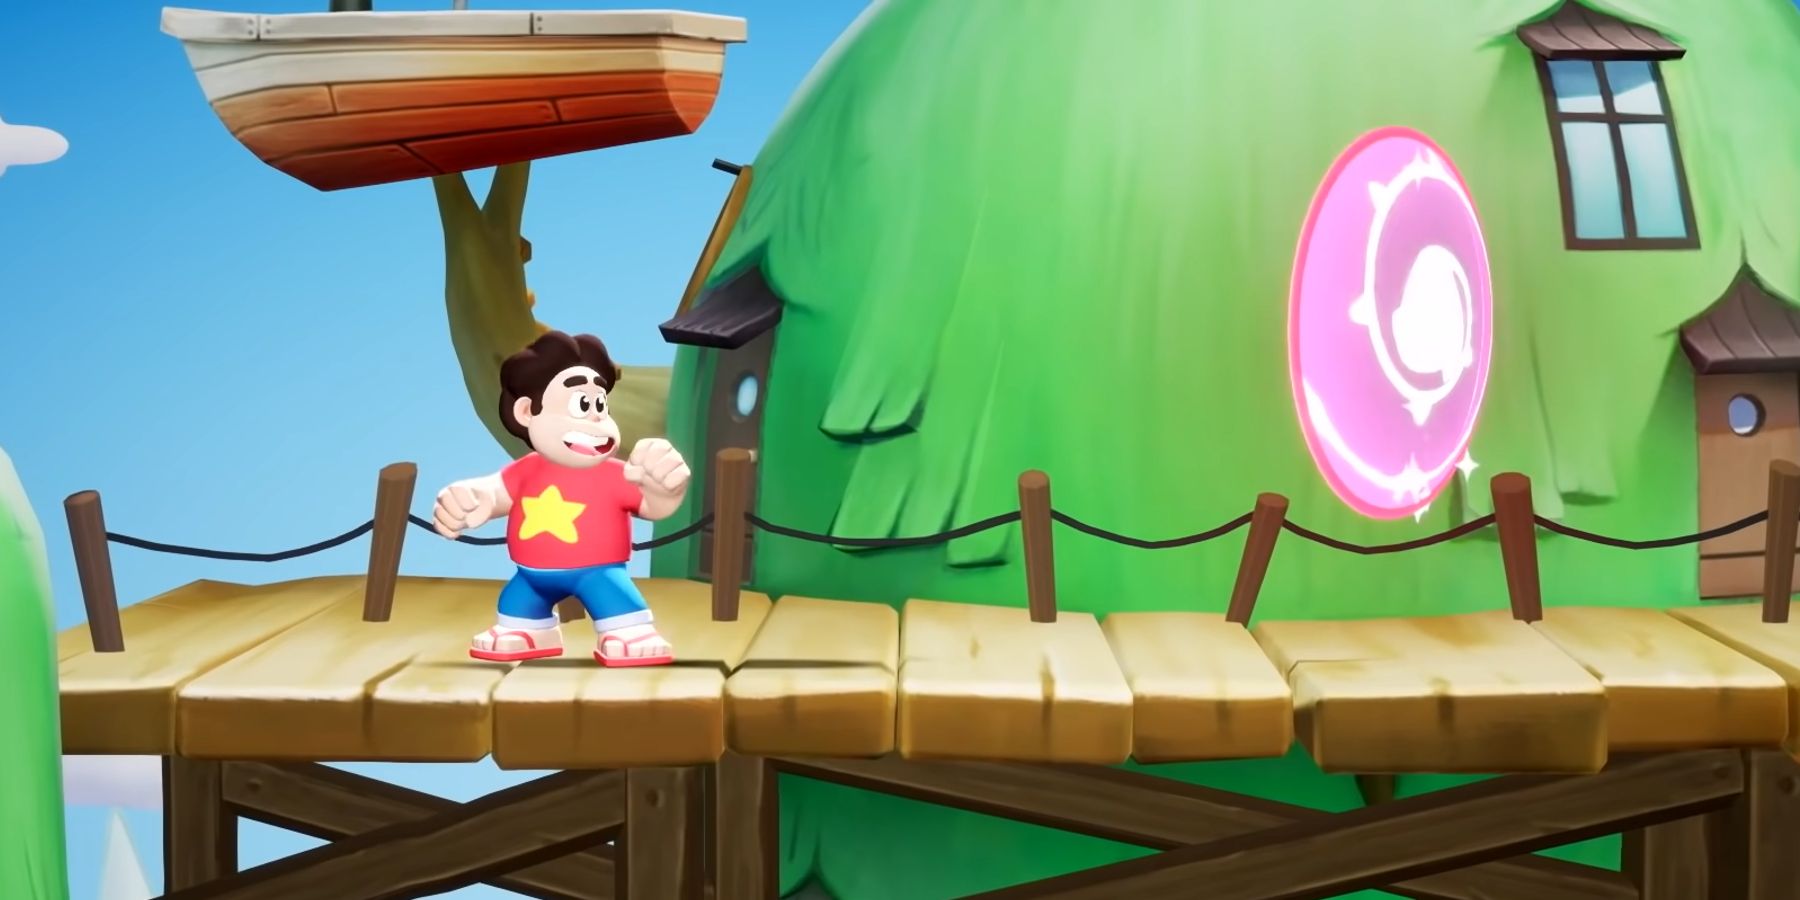 Steven Universe putting up a shield on the treehouse in MultiVersus